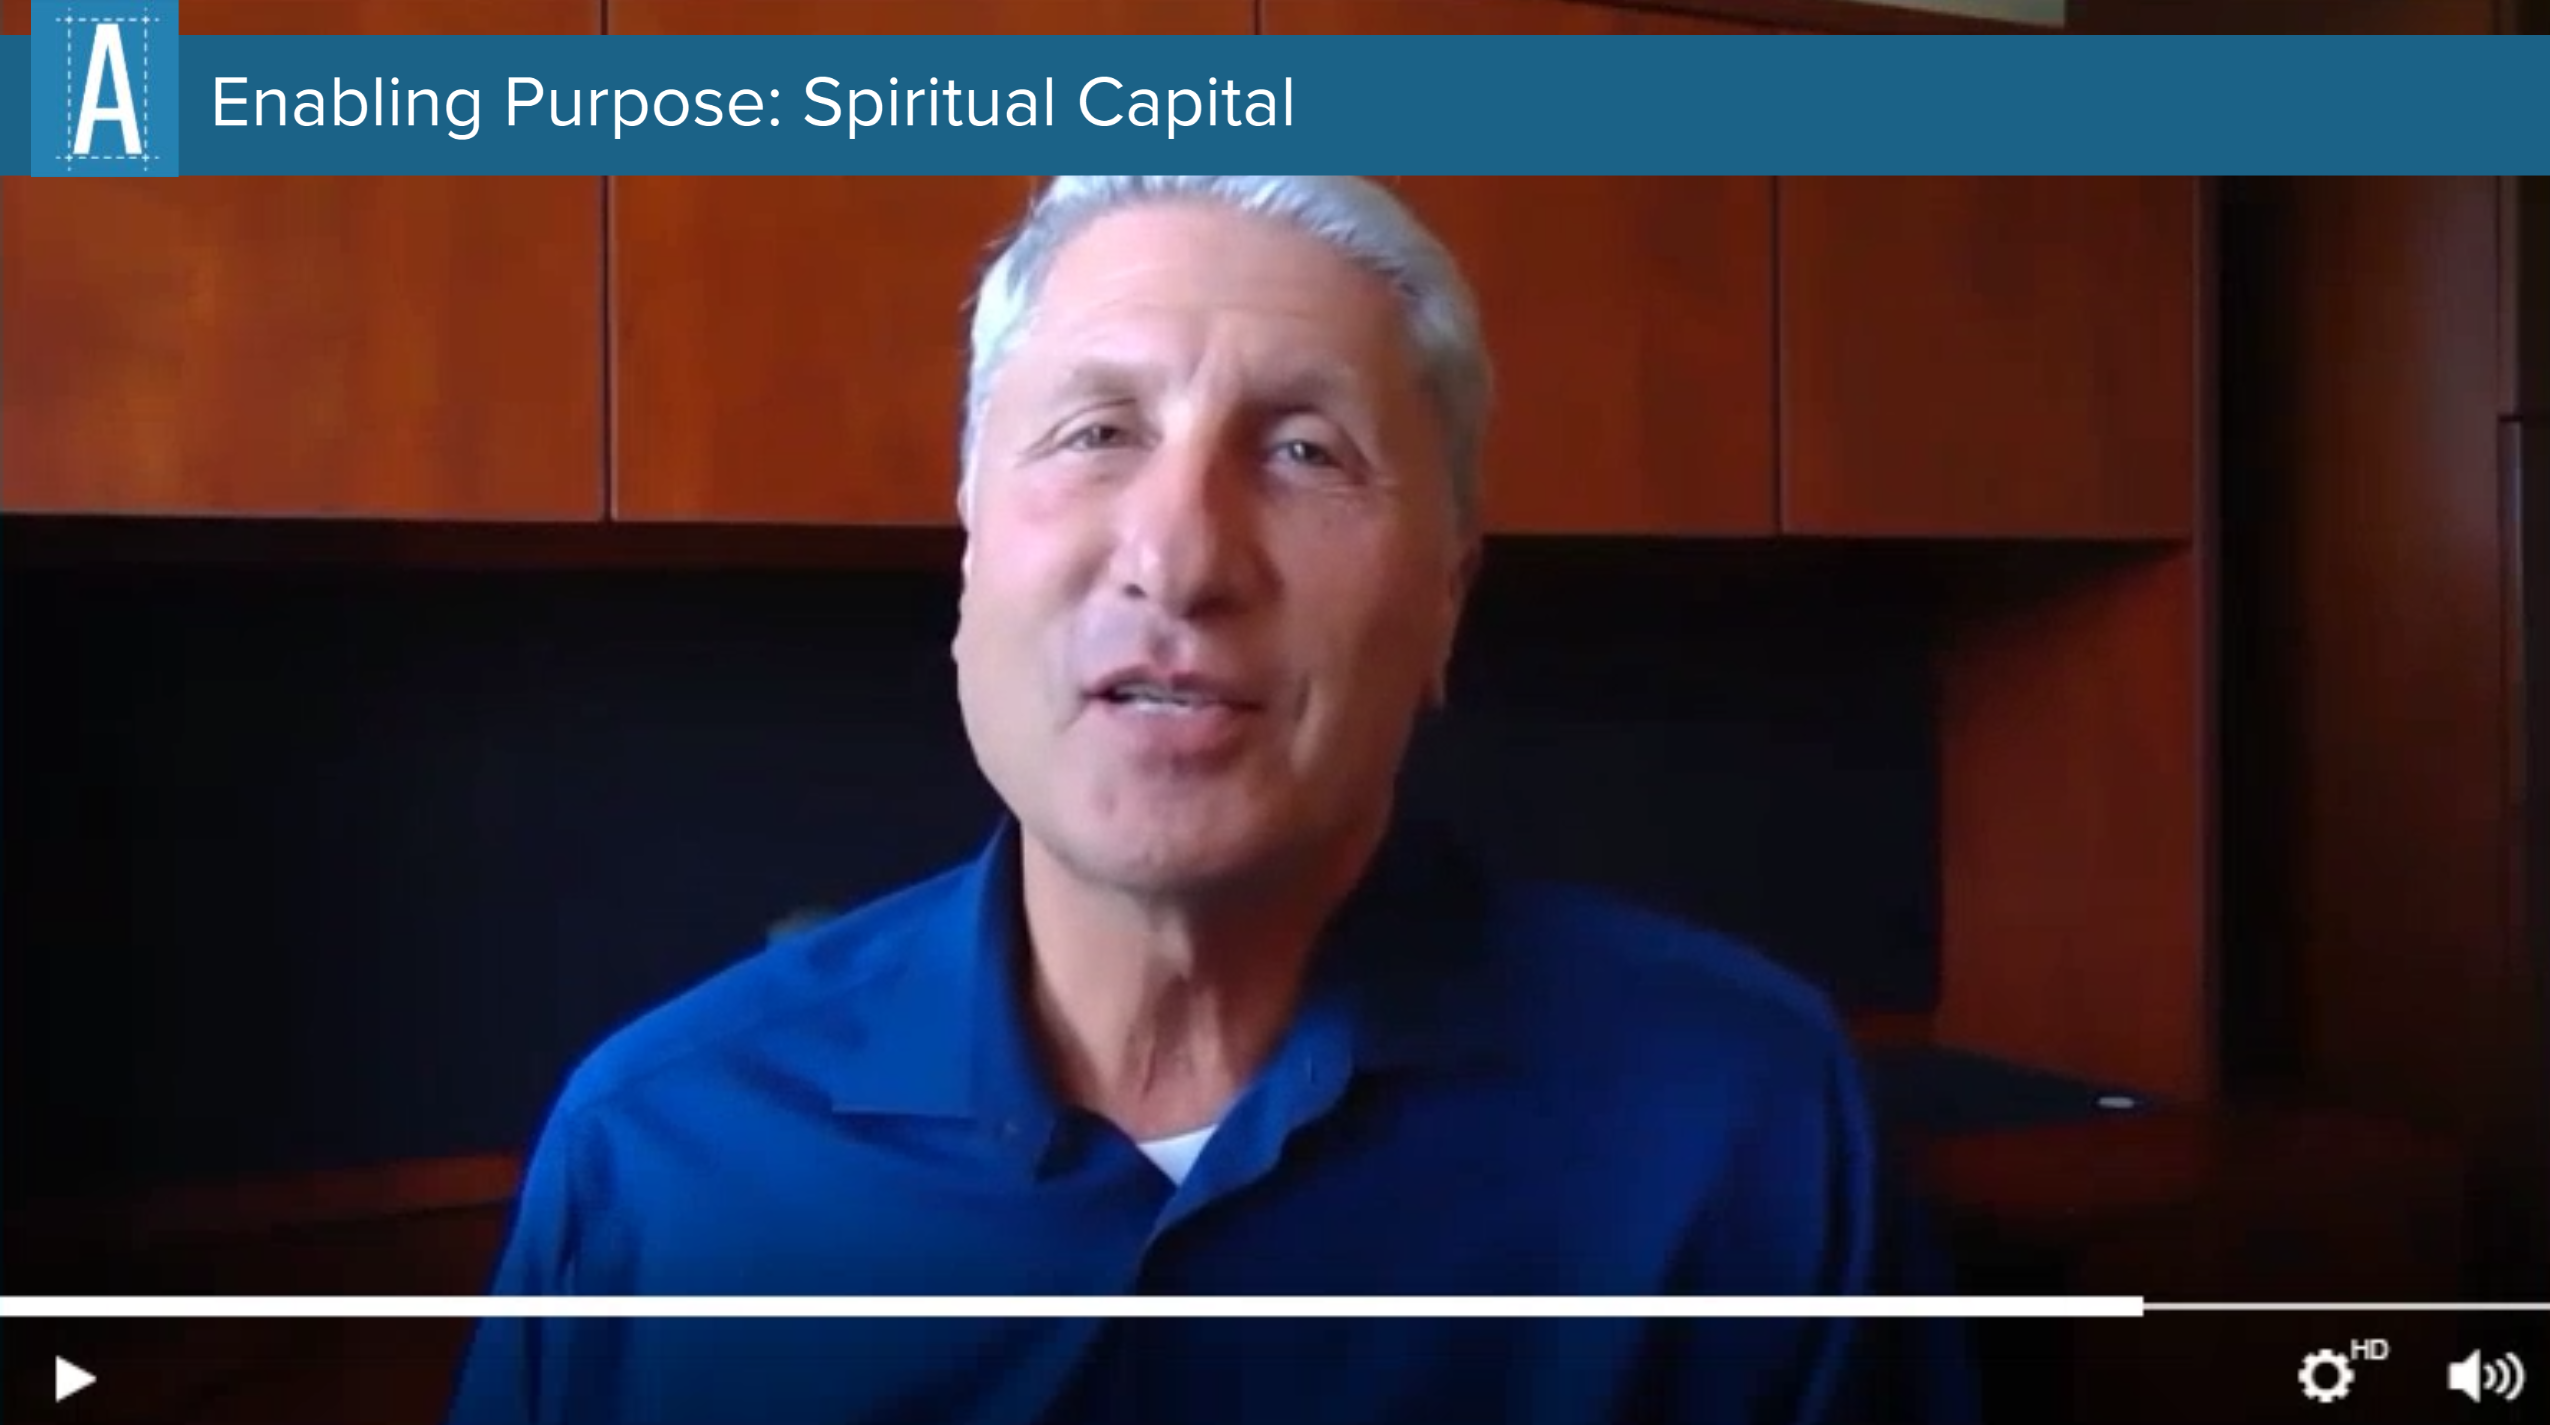 Spiritual Capital: How Big is Your Capital Investment?